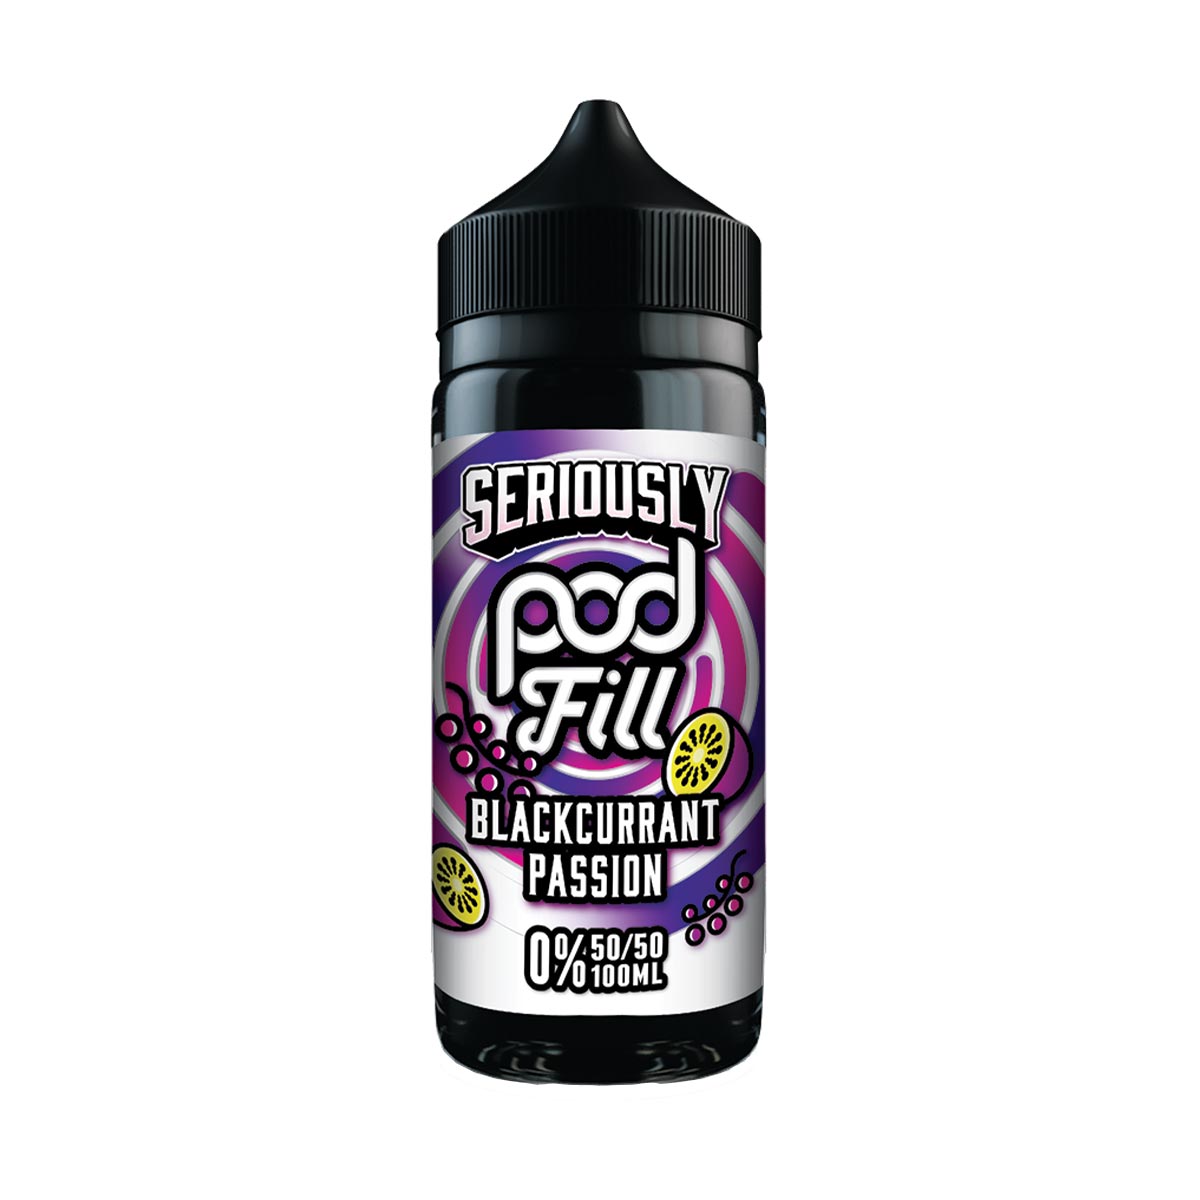 Blackcurrant Passion 50/50 100ml Shortfill by Seriously Pod Fill